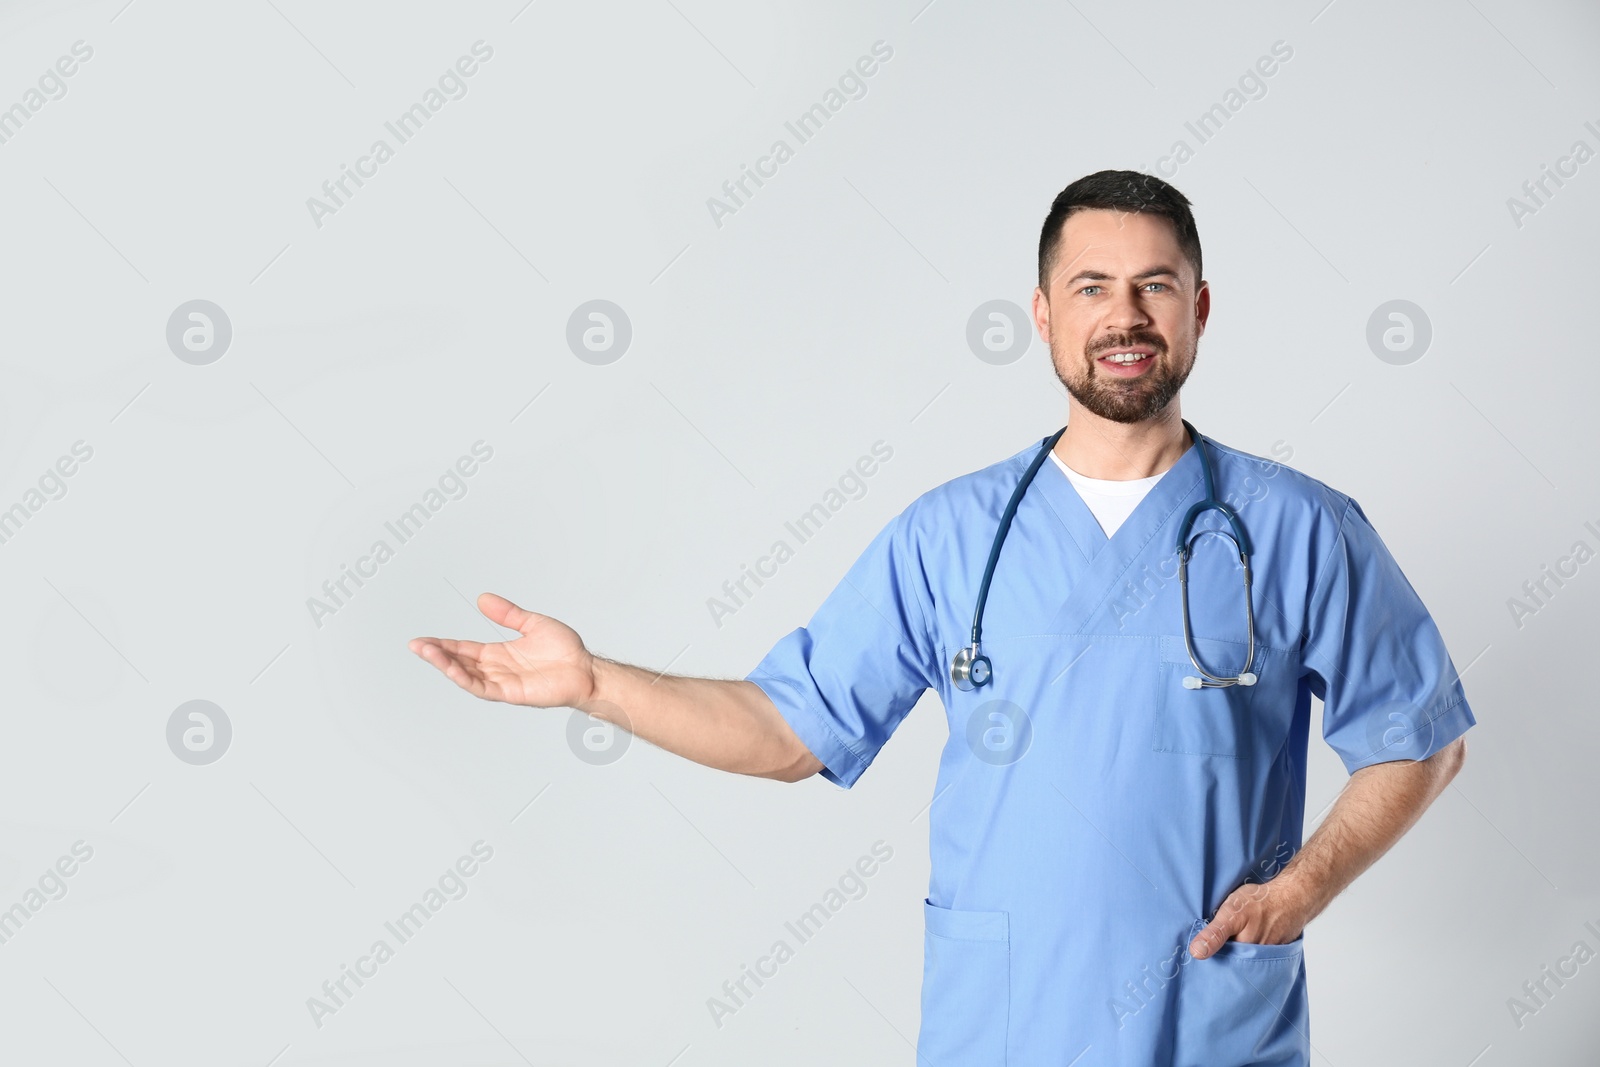 Photo of Portrait of mature doctor against light background